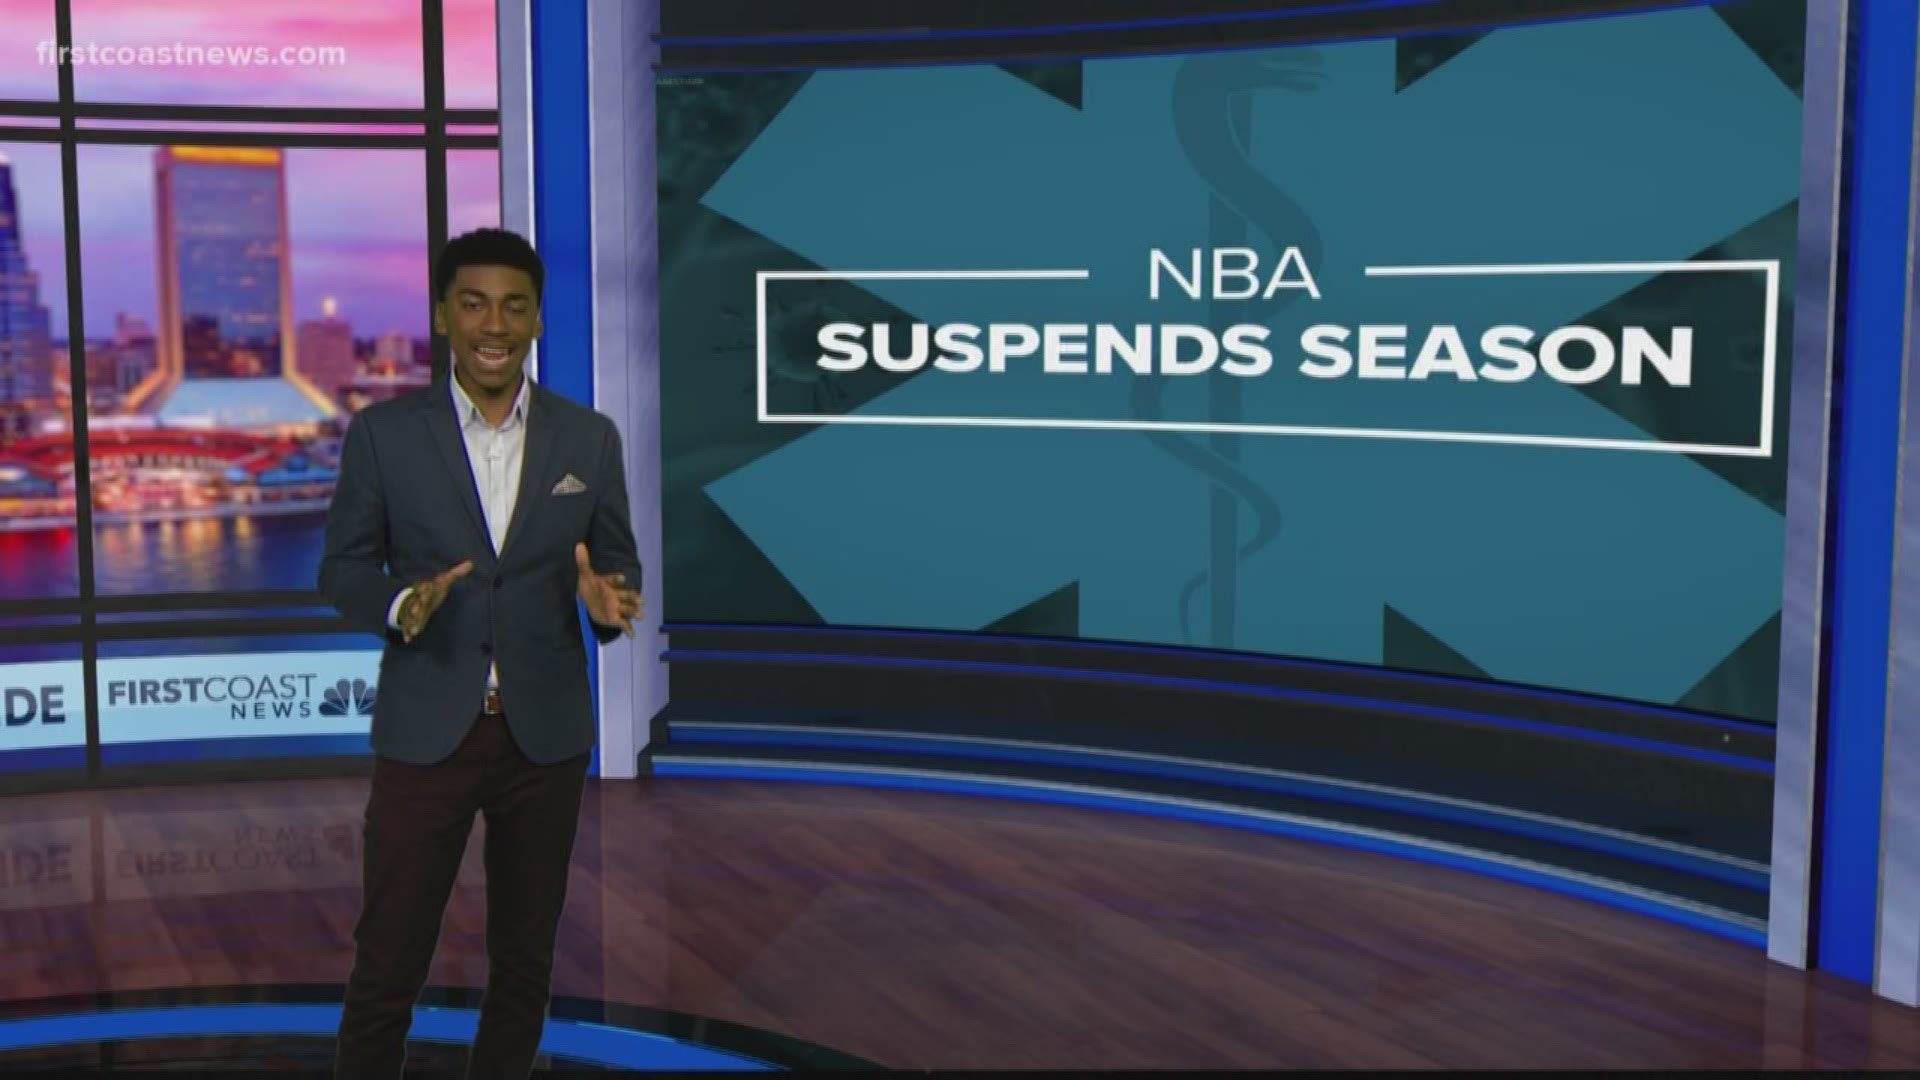 The NBA is the first major American sports league to suspend its season due to the coronavirus pandemic.